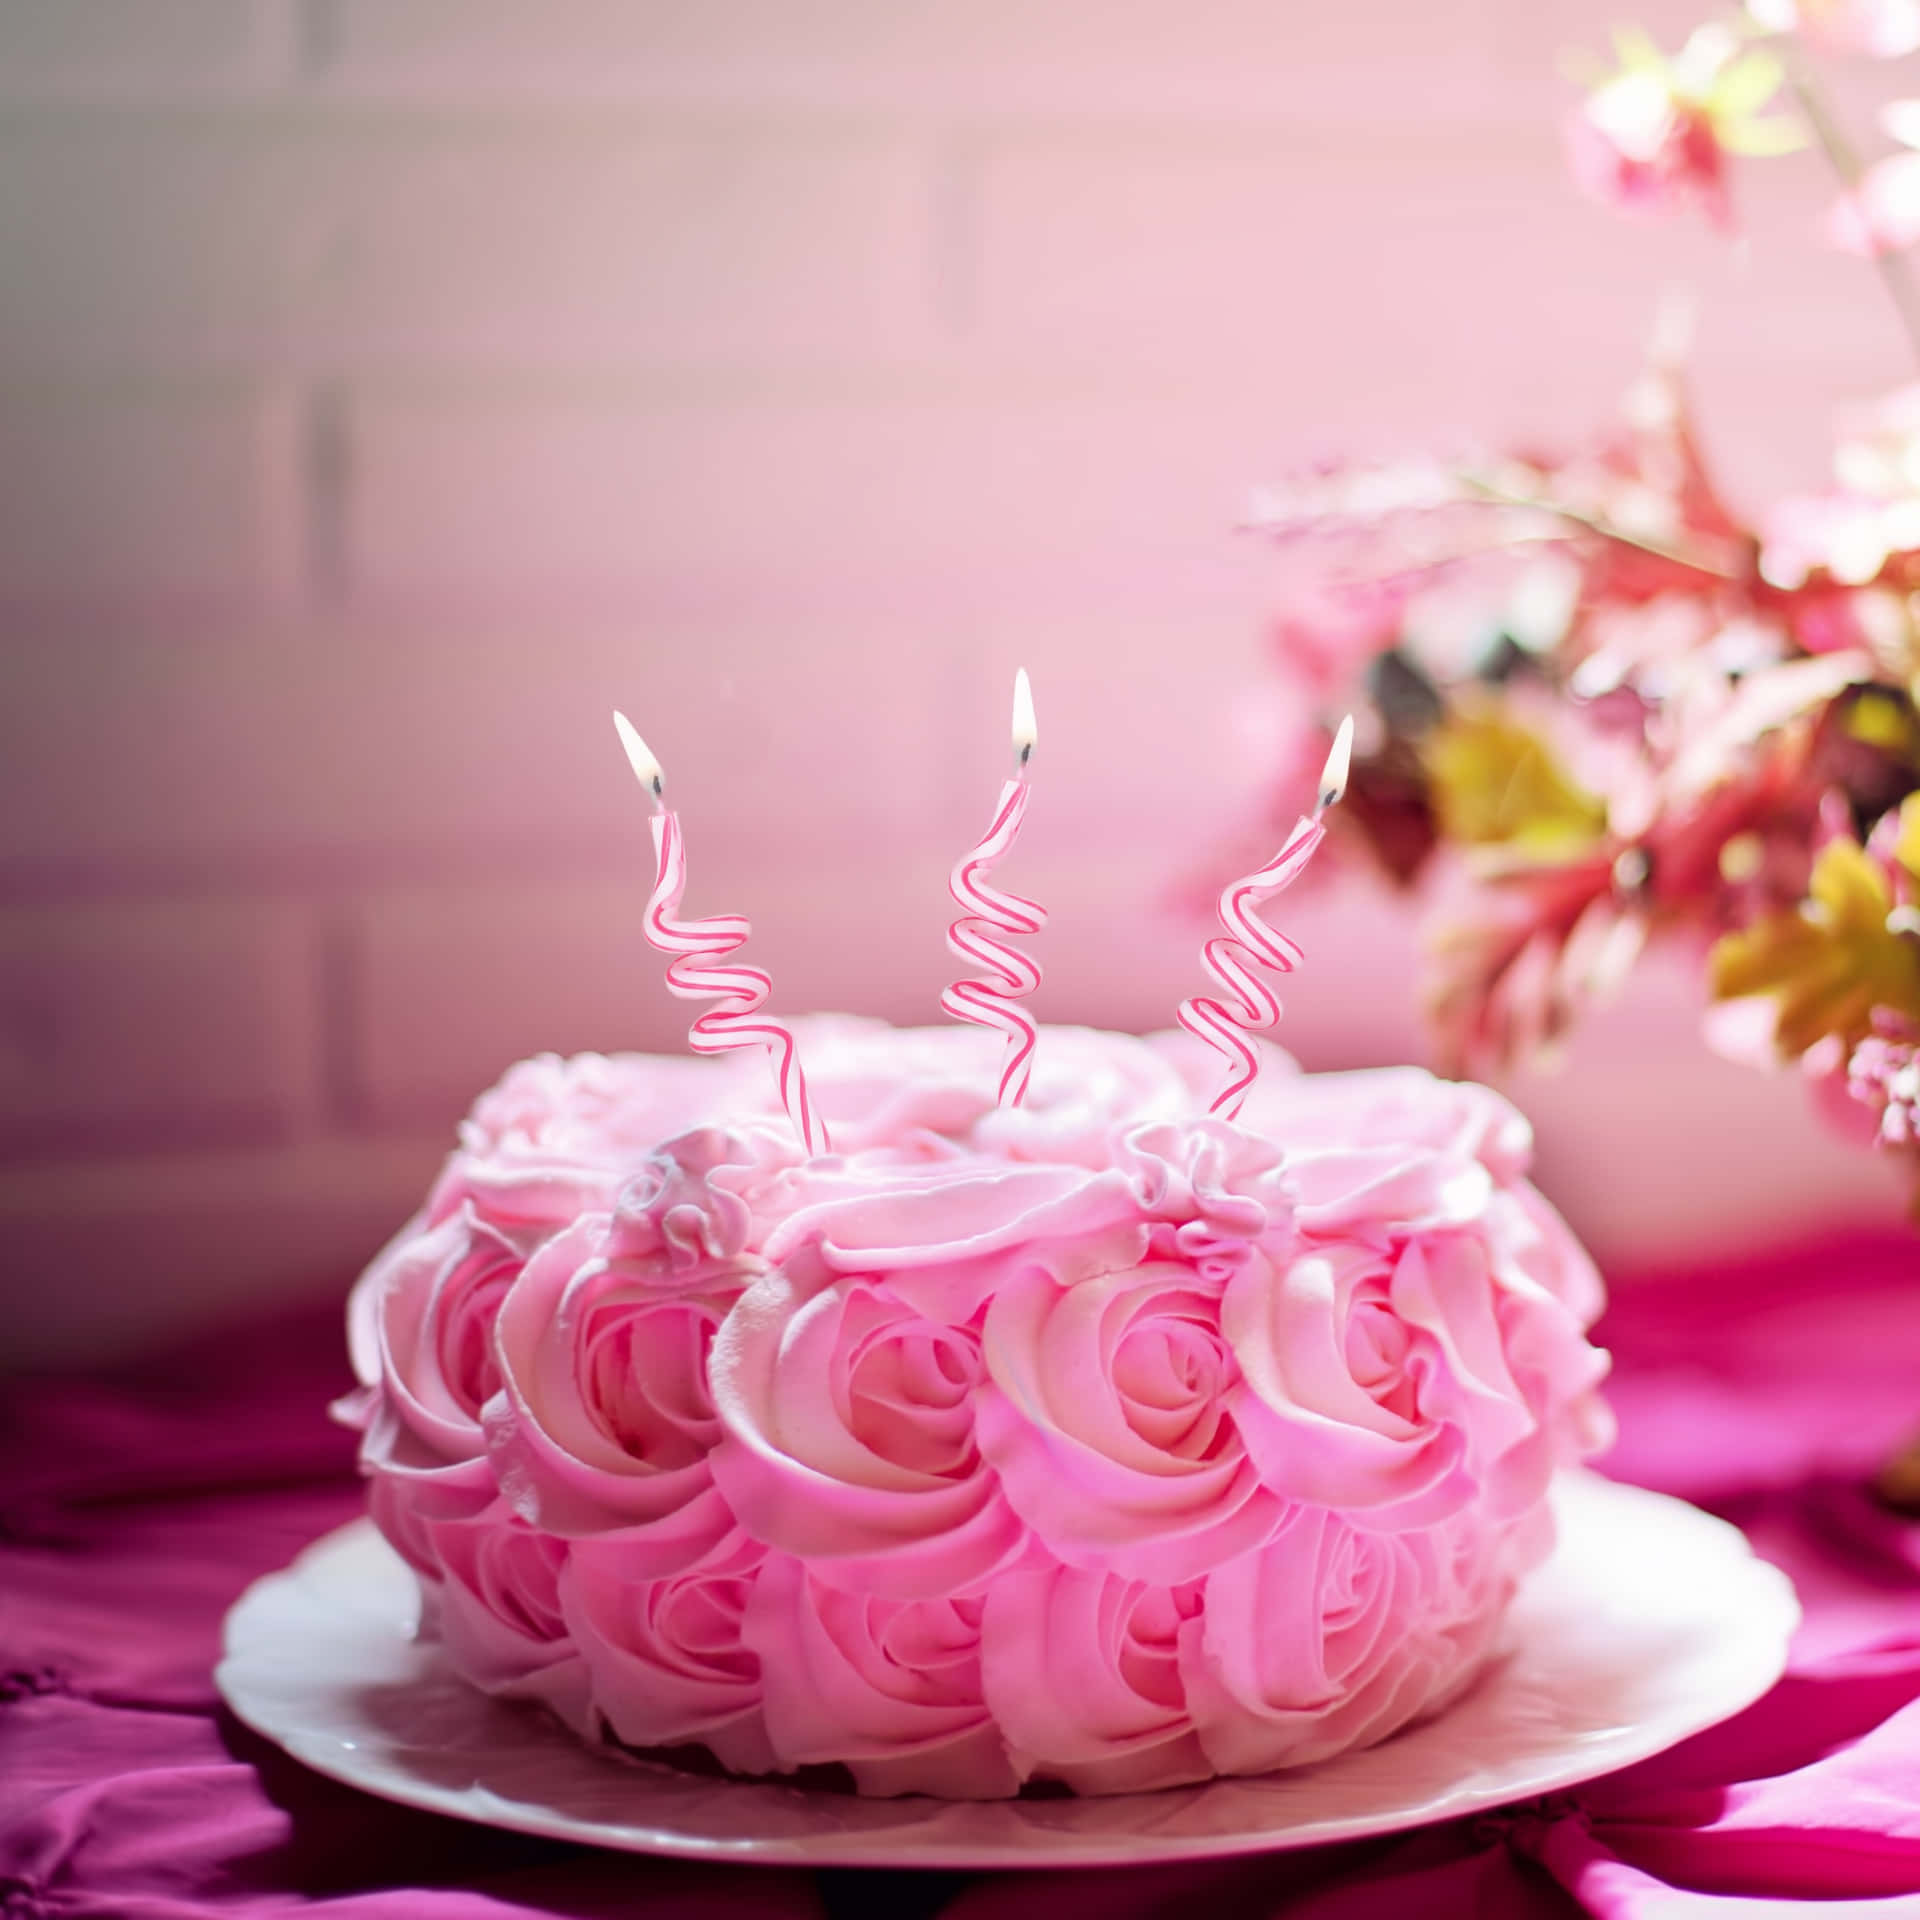 A Pink Cake With Candles On Top Wallpaper